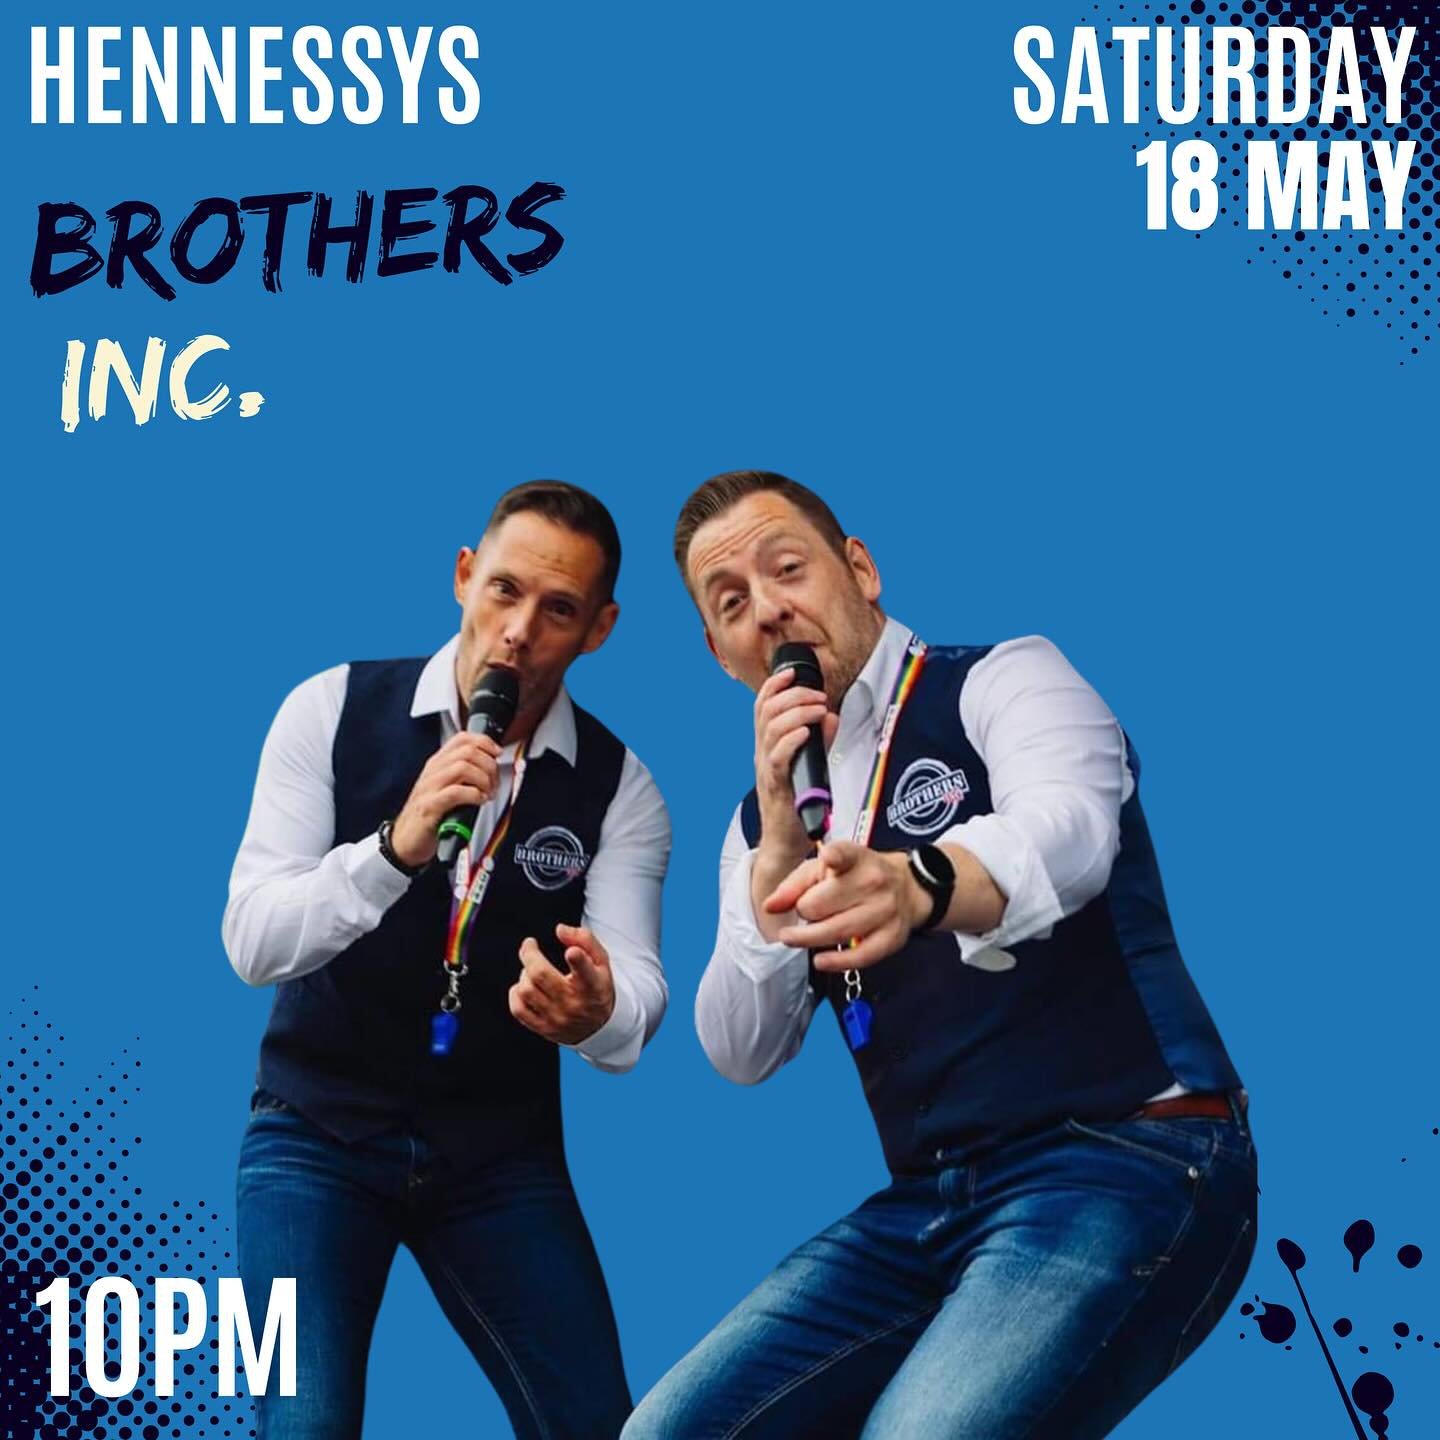 Coming to @hennessysomagh this weekend . . . 

S A T U R D A Y  1 8  M A Y 
𝐁𝐫𝐨𝐭𝐡𝐞𝐫𝐬 𝐈𝐧𝐜.
Dancing from 10pm 
DJ STEVIE from midnight 
#dontmissit #saturday #live